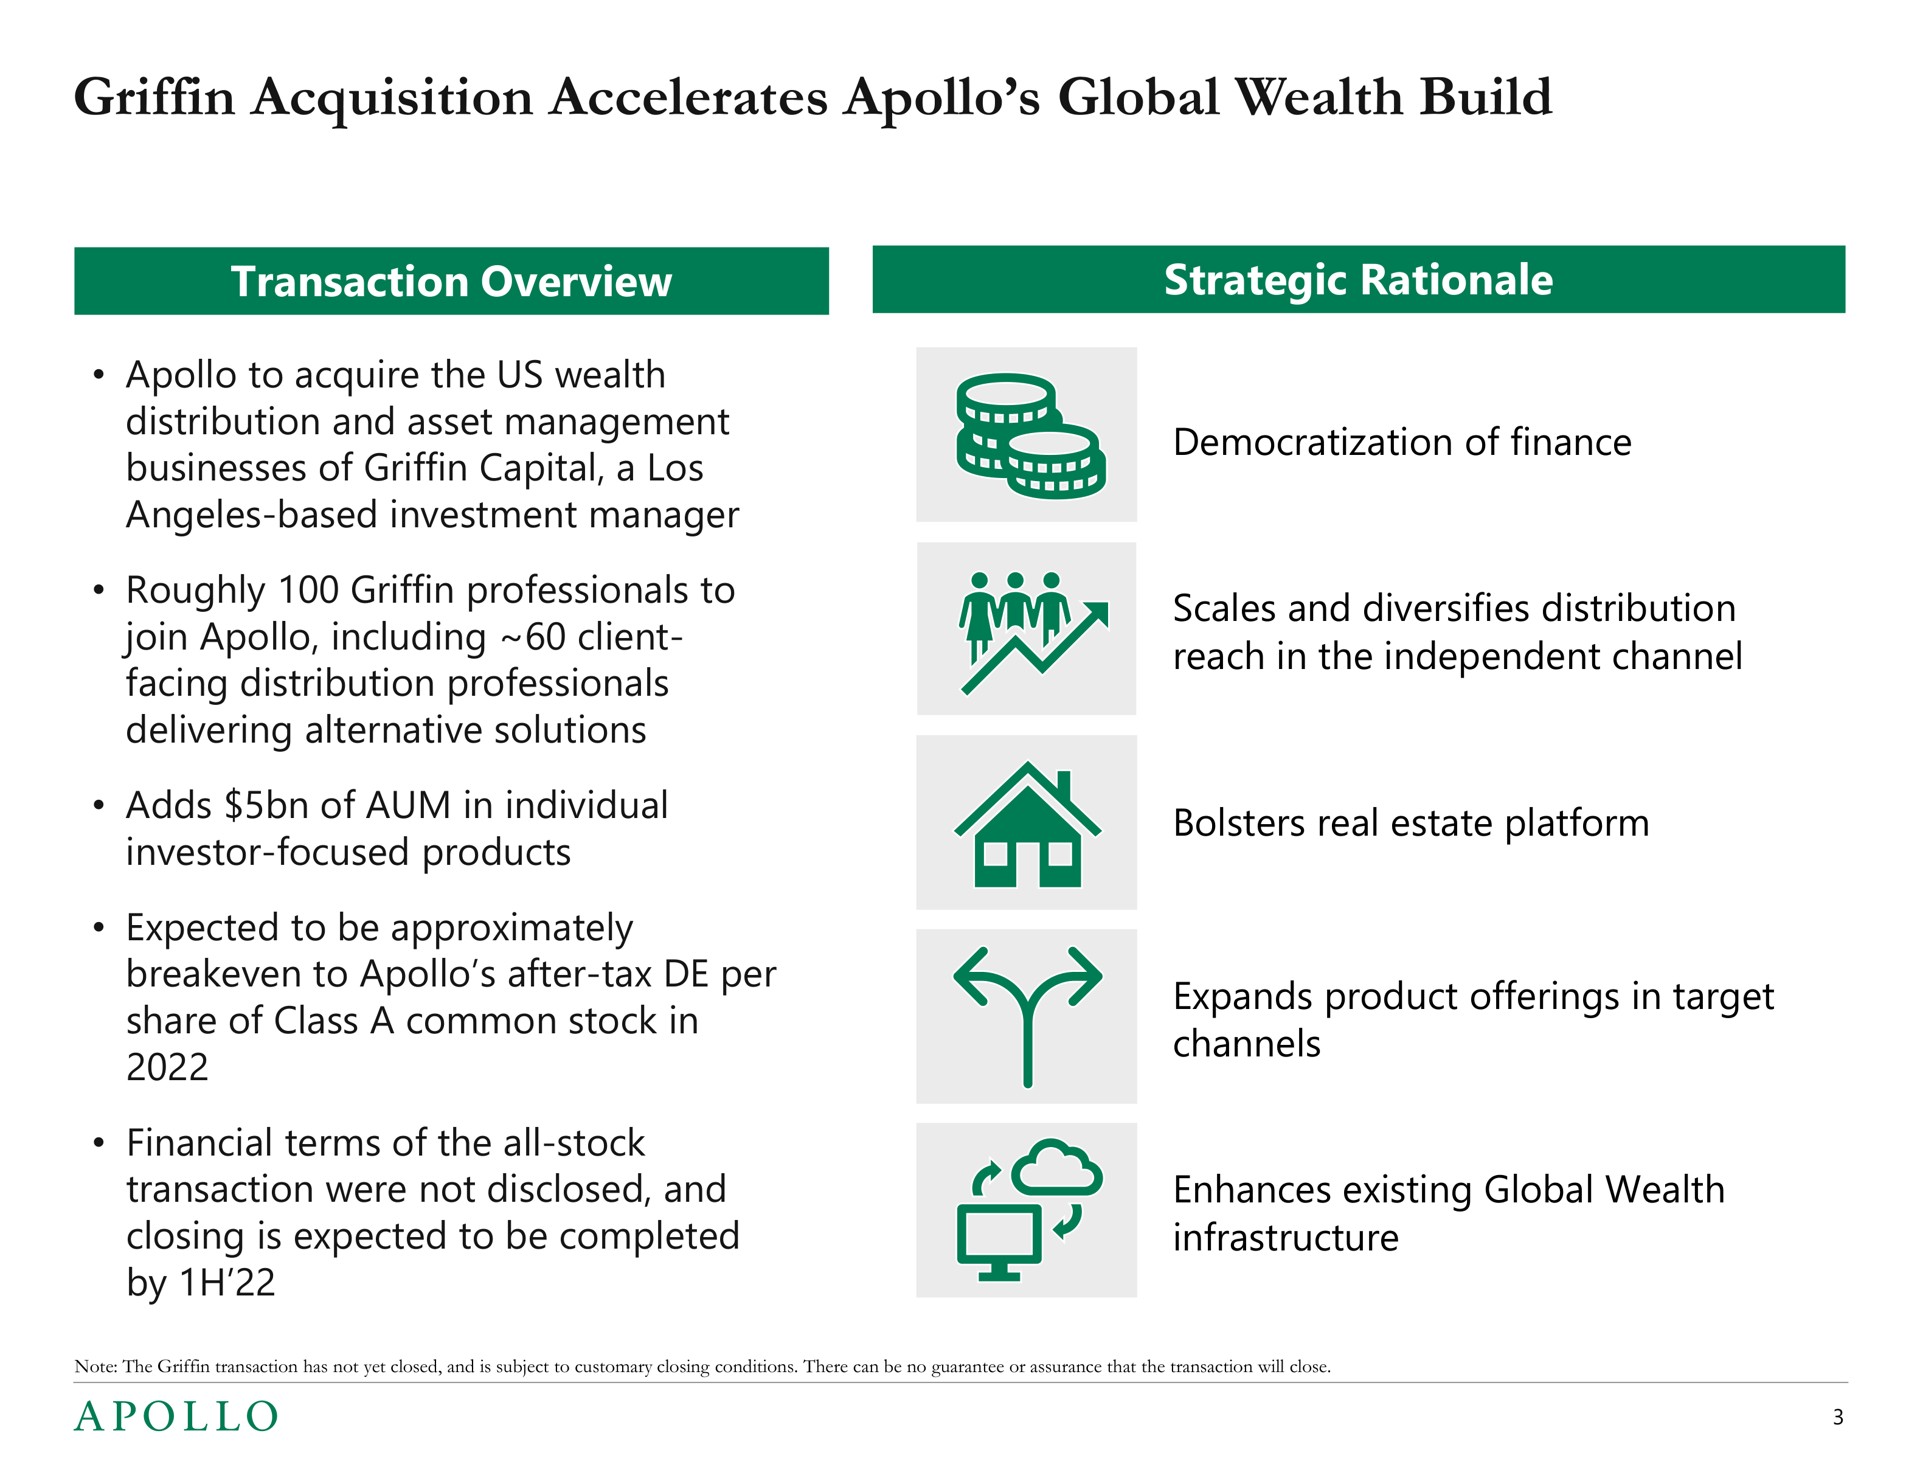 griffin acquisition accelerates global wealth build | Apollo Global Management